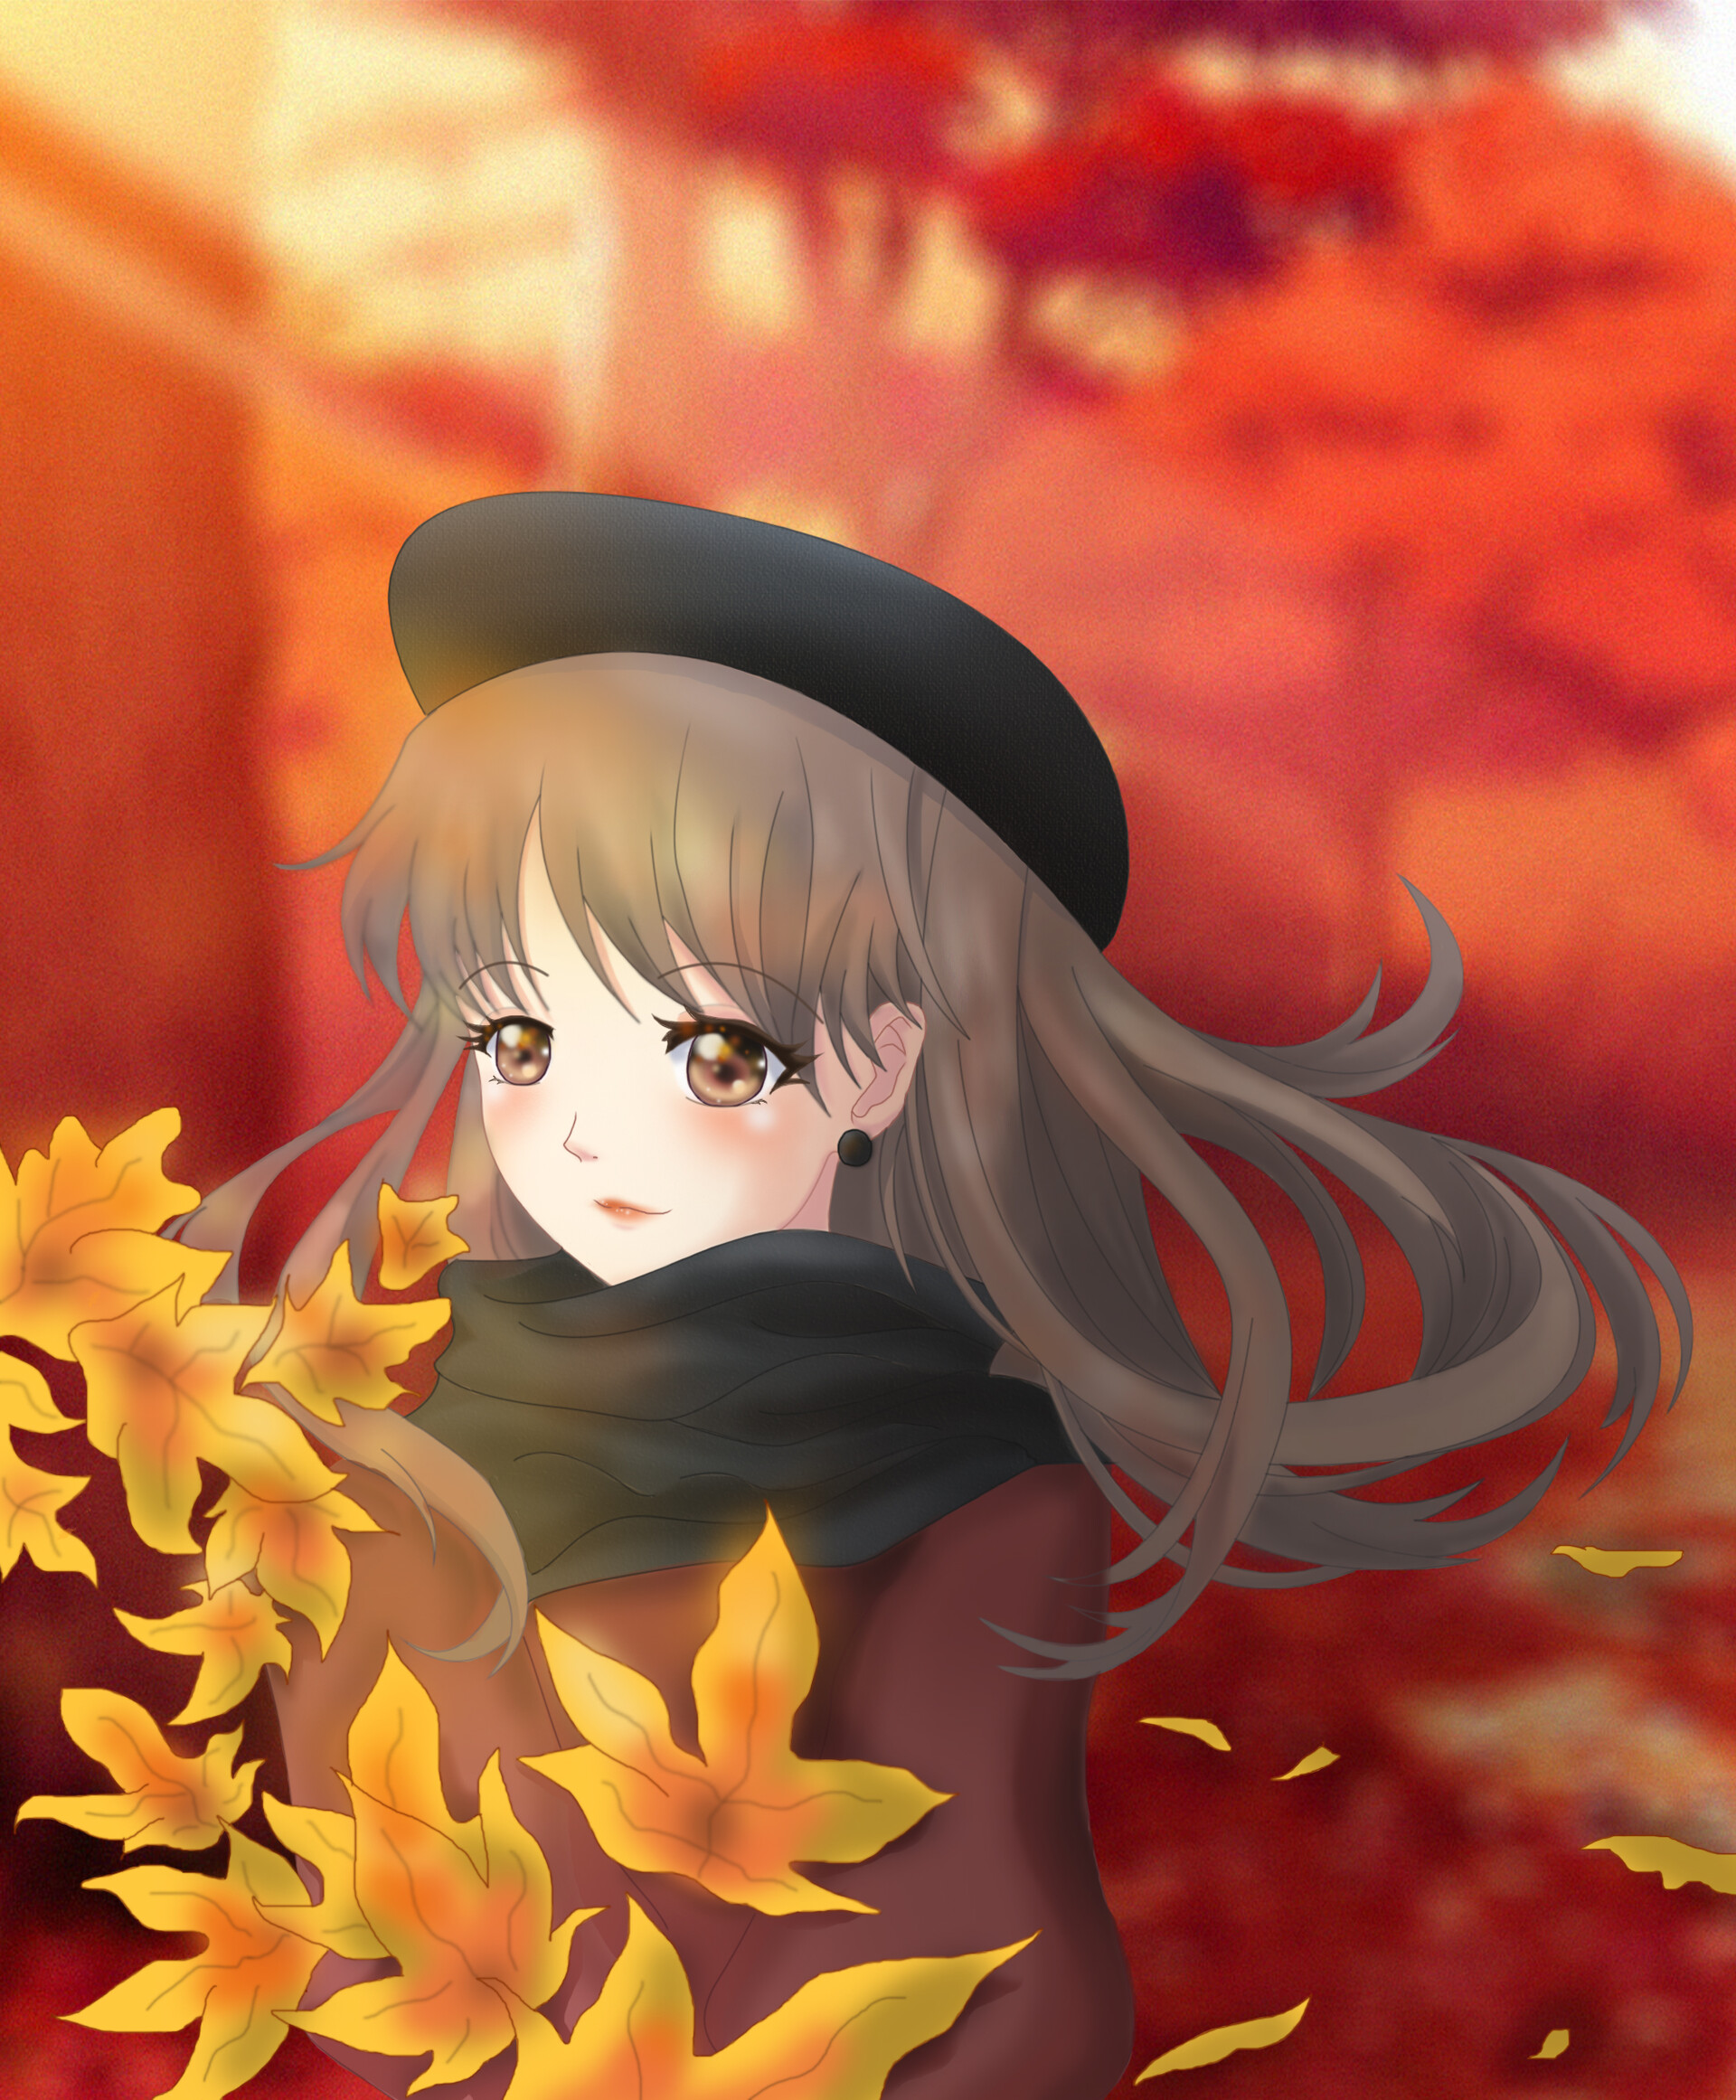 Anime autumn scenery Wallpapers Download | MobCup